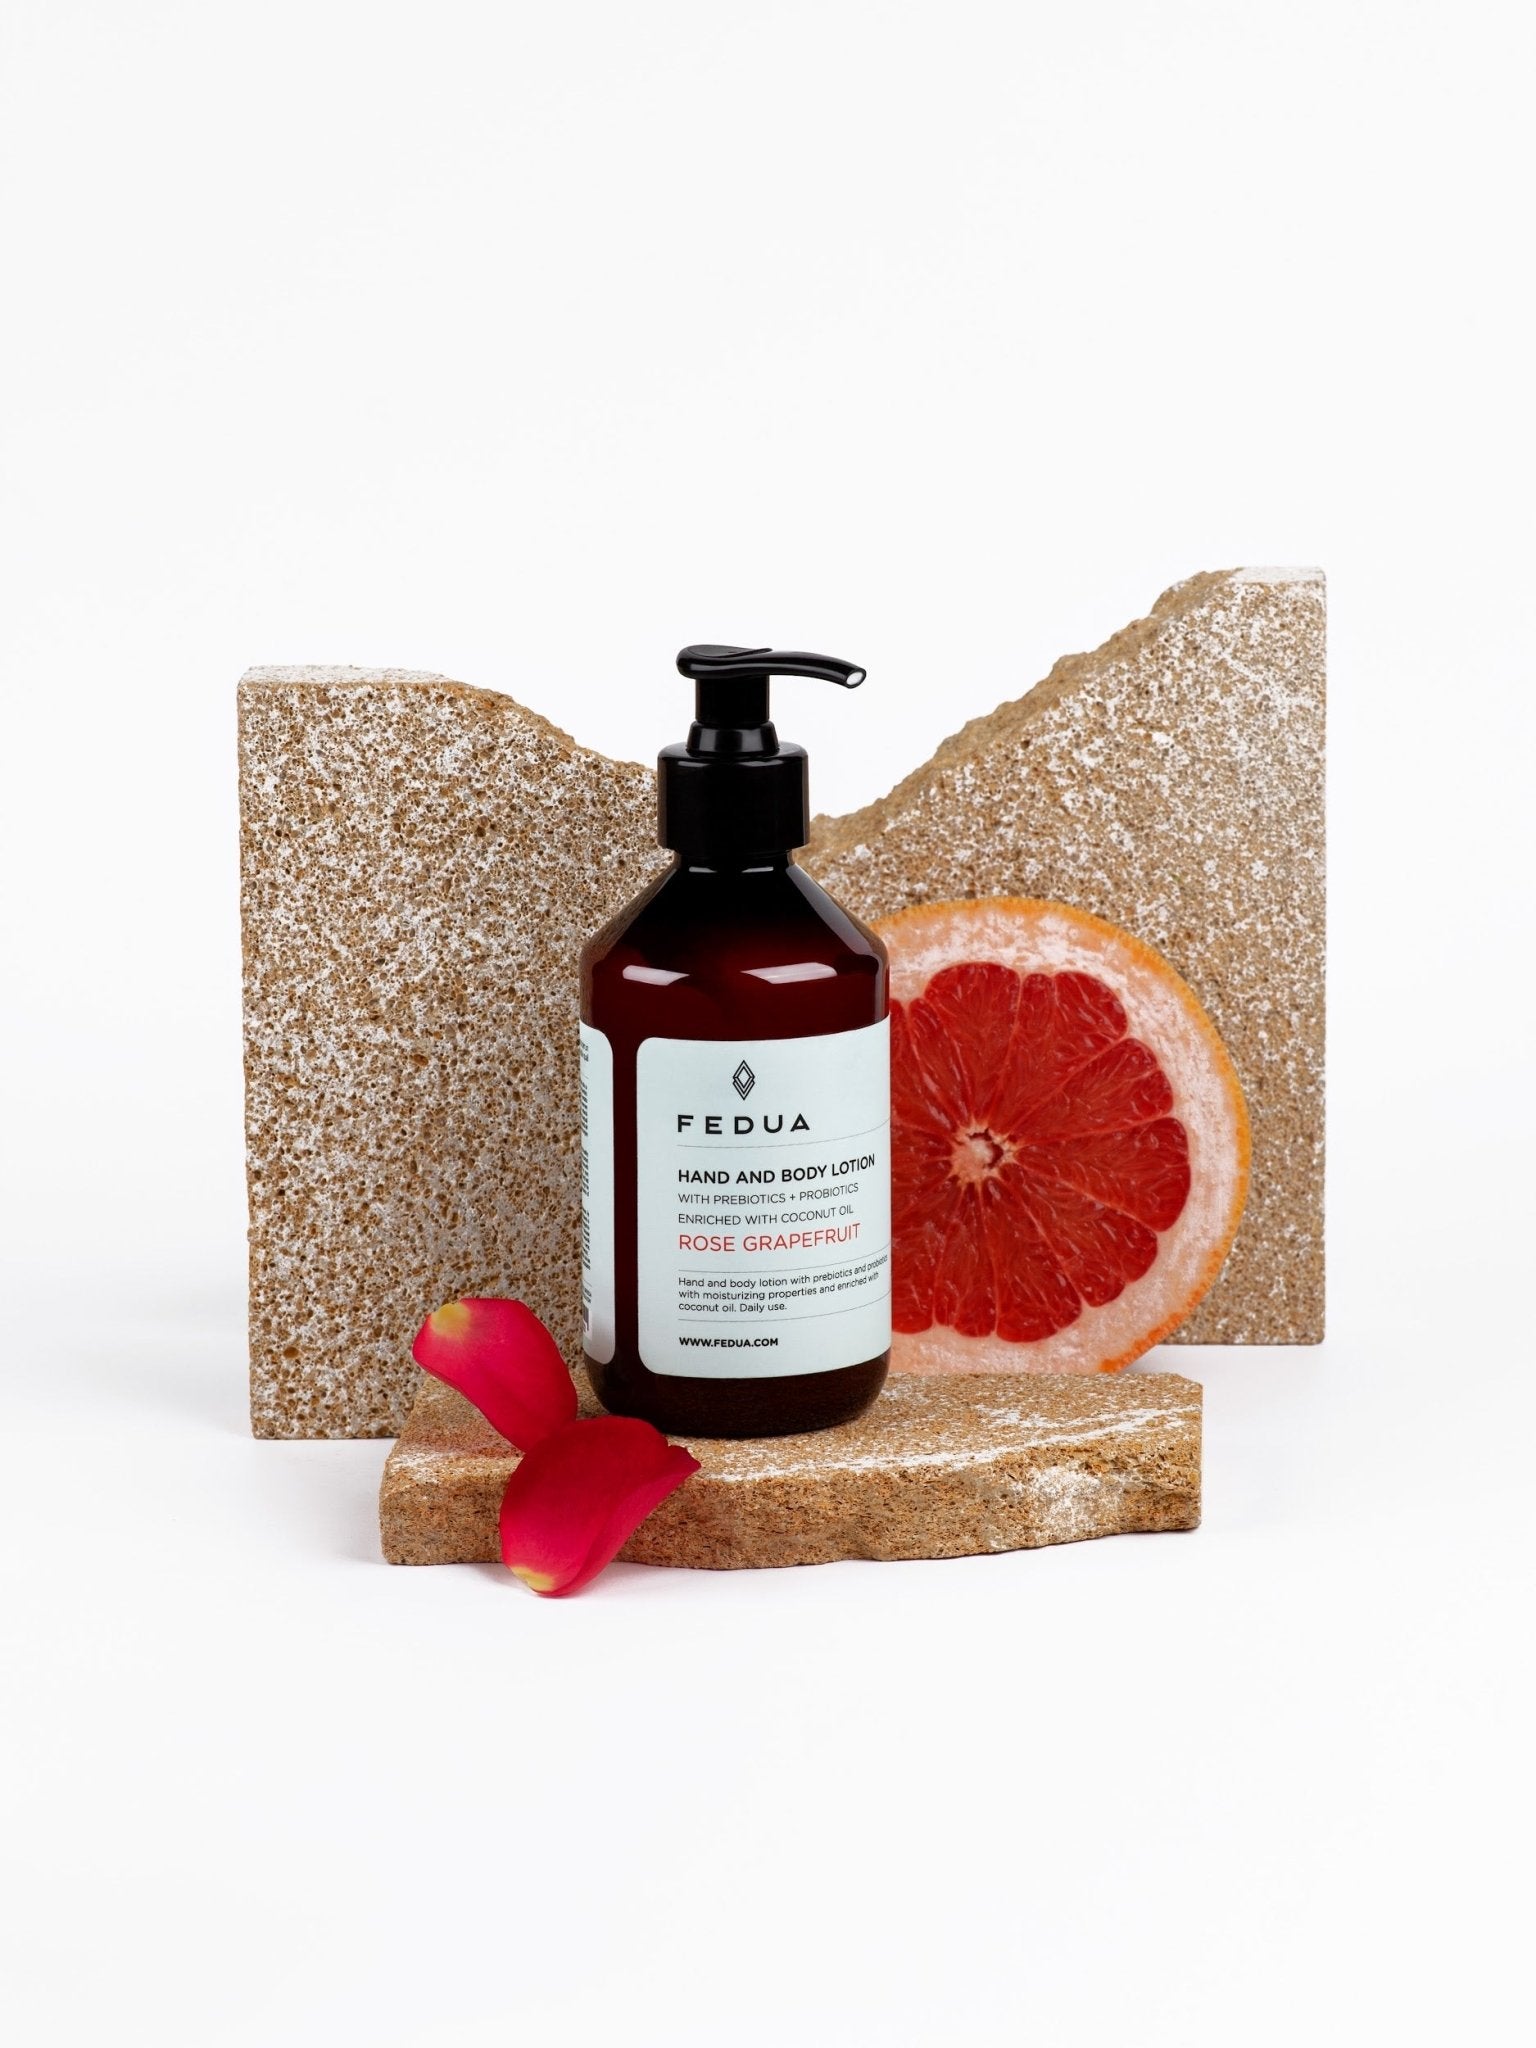 HAND AND BODY LOTION ROSE GRAPEFRUIT 300 ml